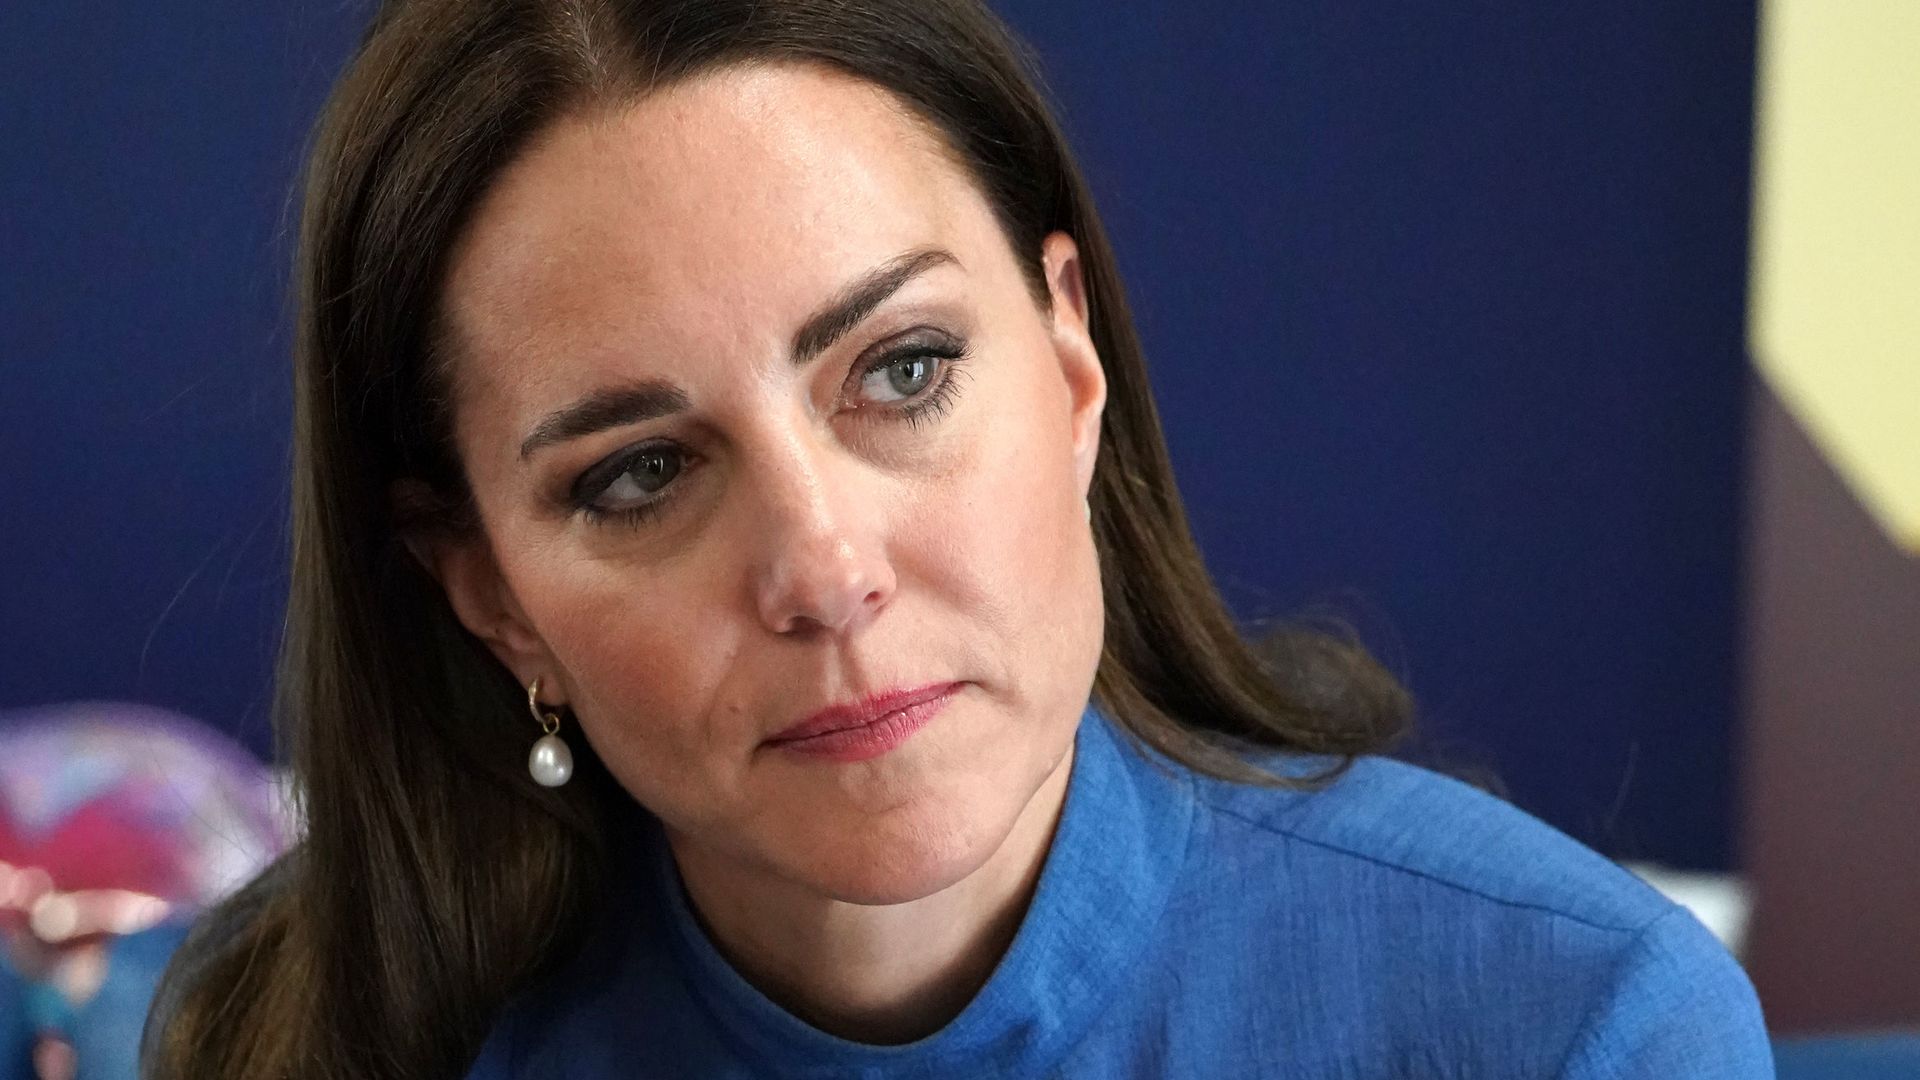 Princess Kate opted for symbolic pearl earrings in her poignant new photo, here's why